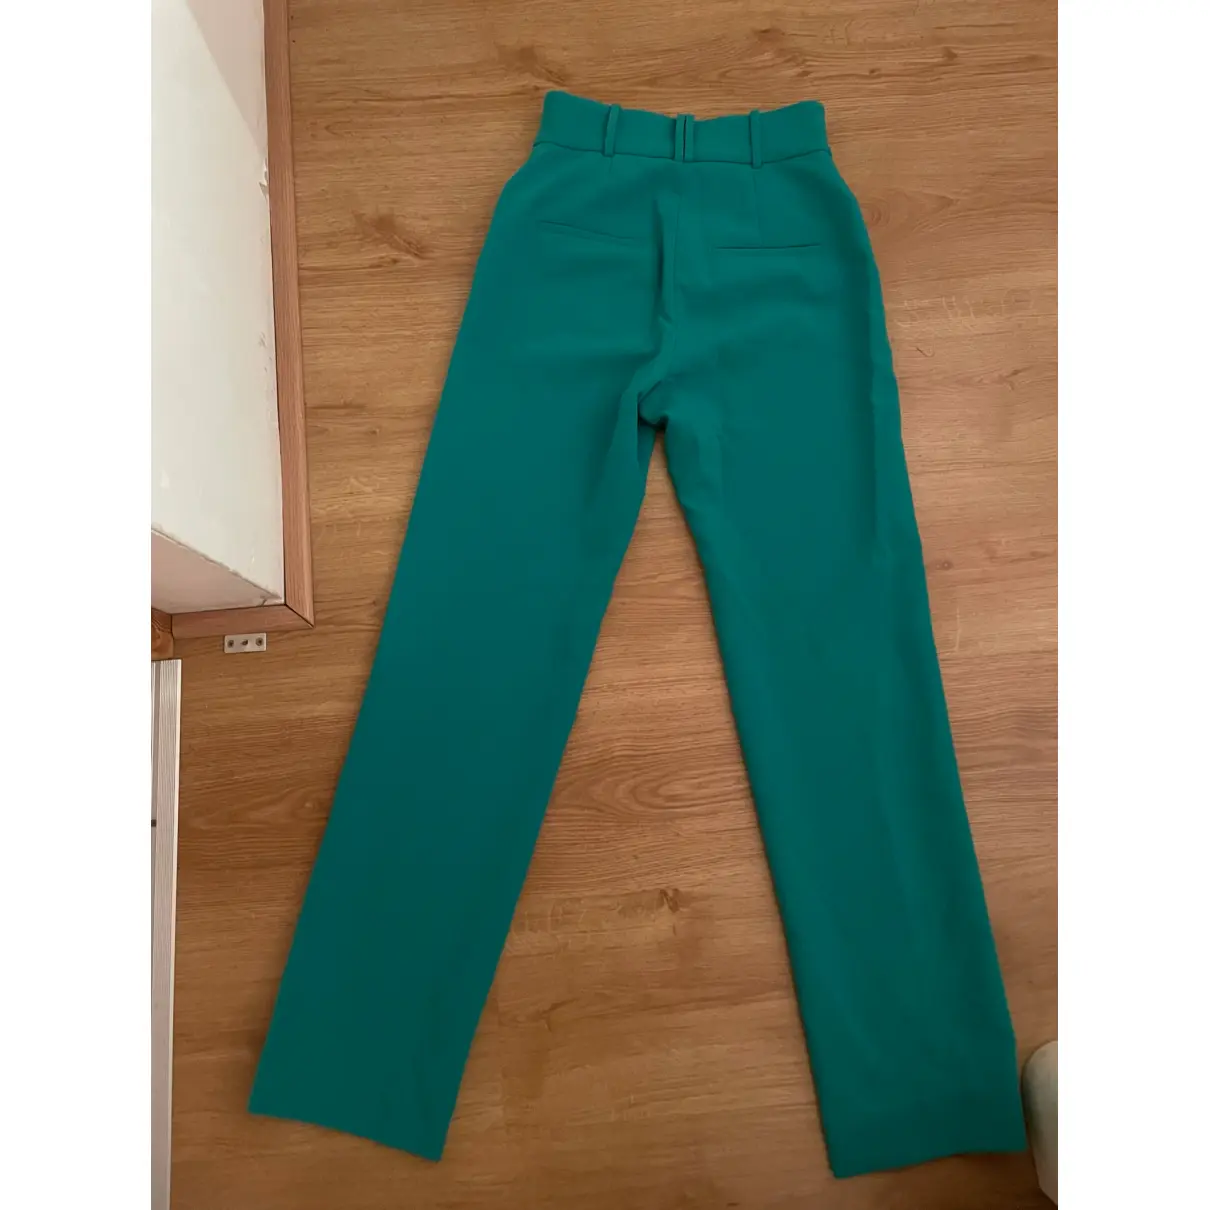 Buy & Other Stories Trousers online